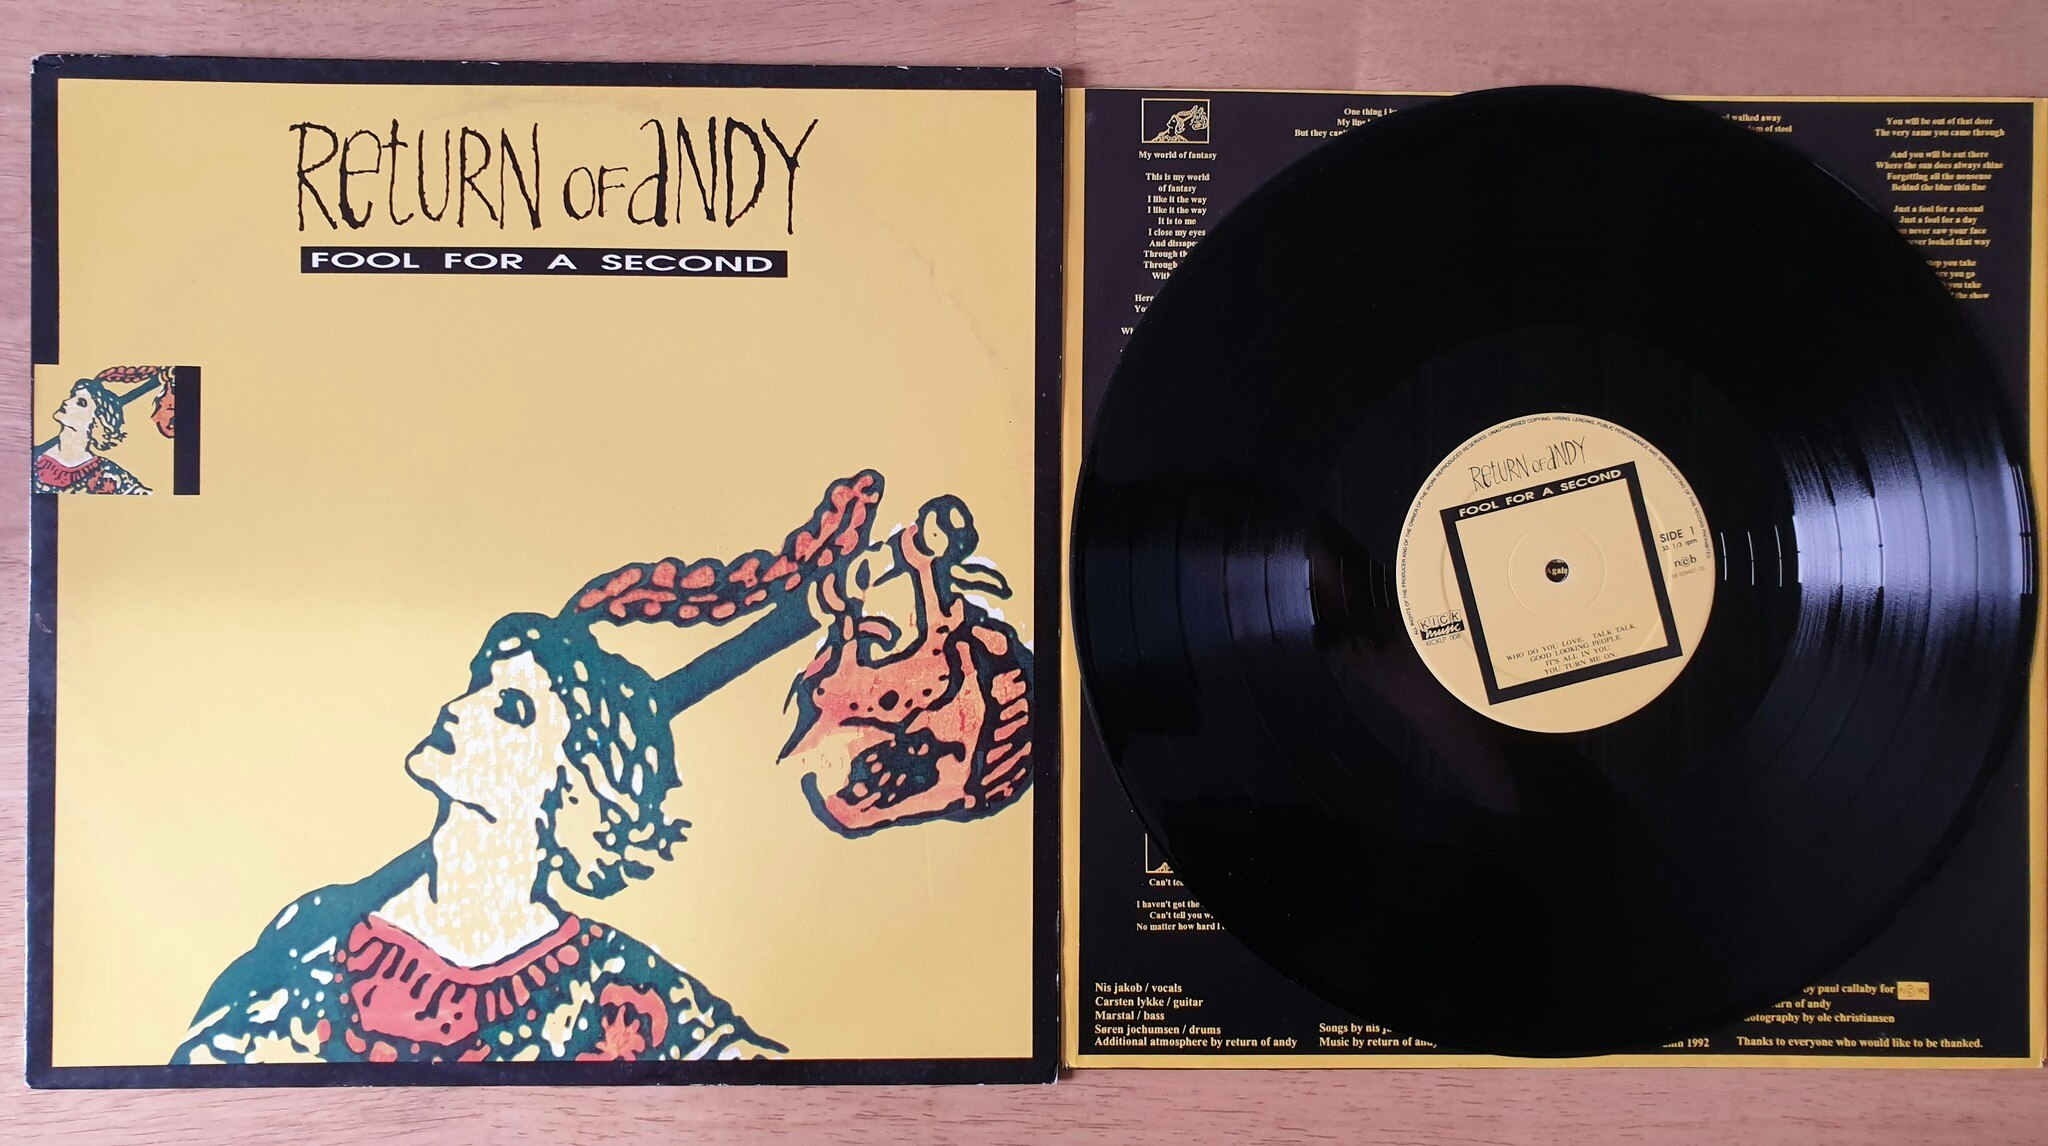 Return of Andy, Fool for a second. Vinyl LP